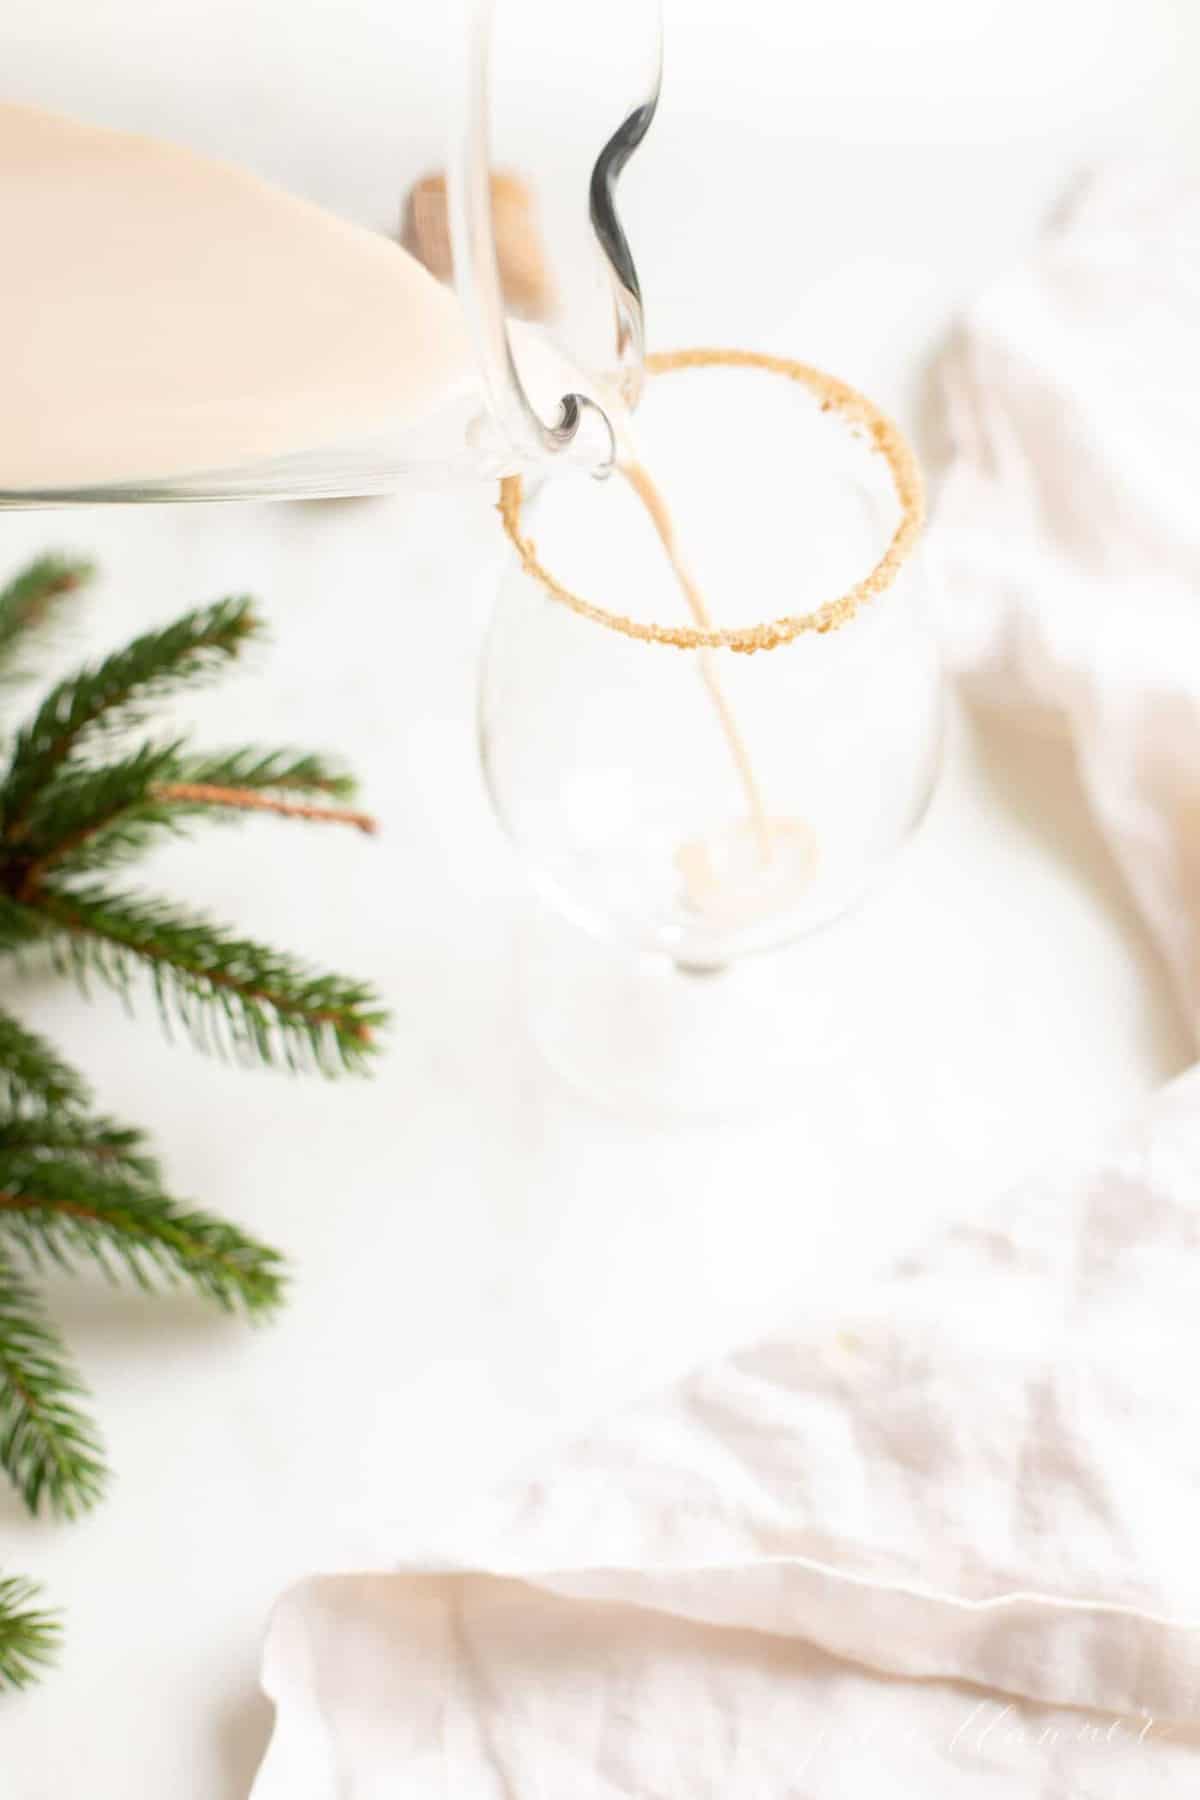 A oatmeal cookie cocktail in a clear glass, holiday greenery to the side, pitcher pouring into glass.